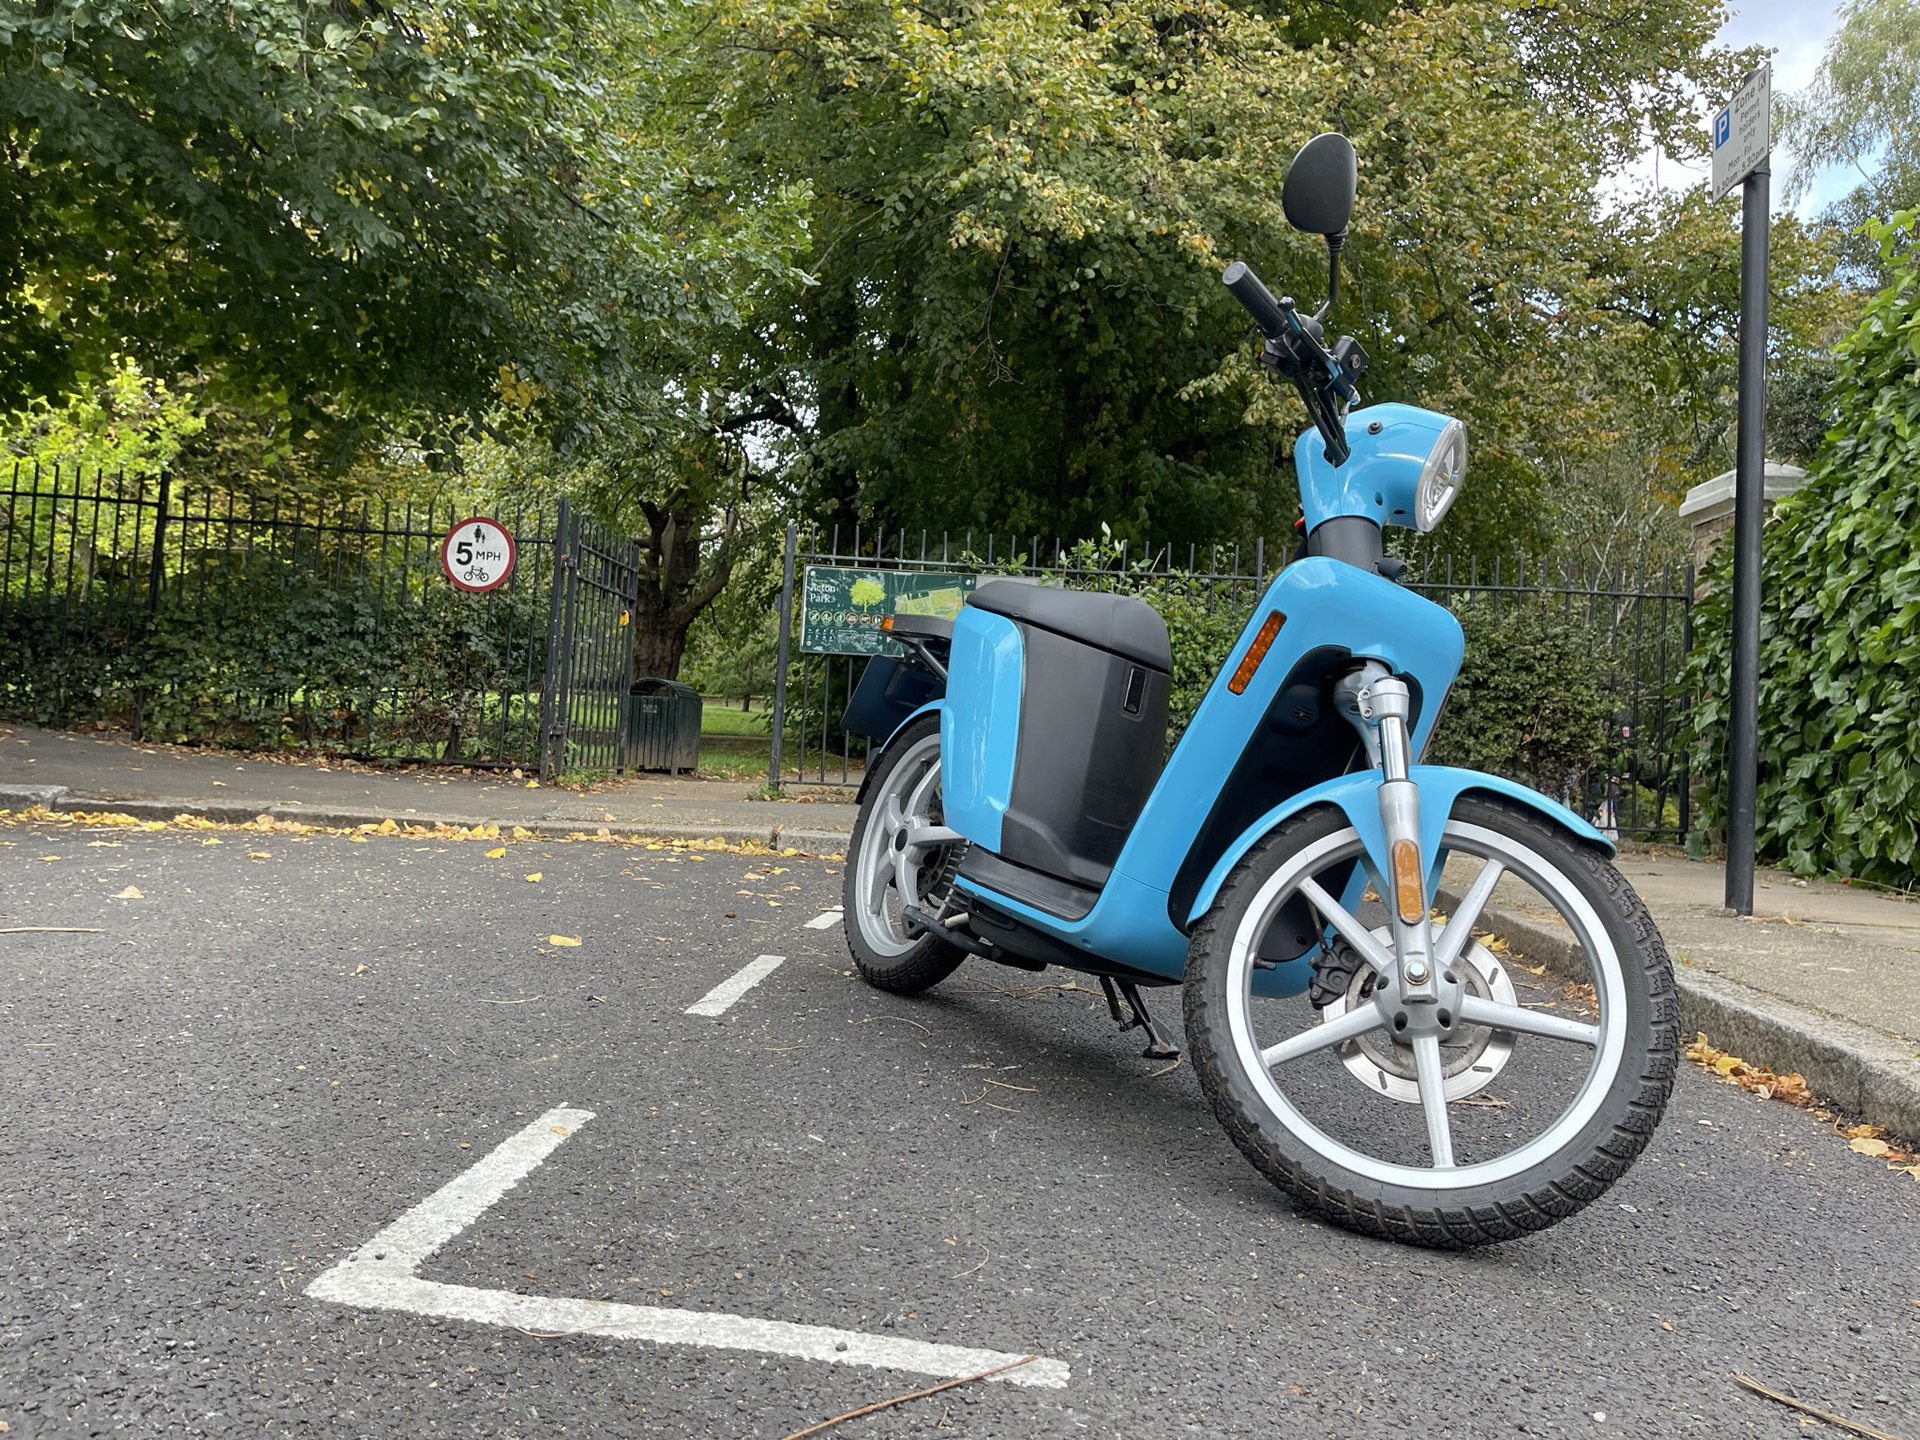 Electric scooter Askoll eSpro 70 in blue with park in background